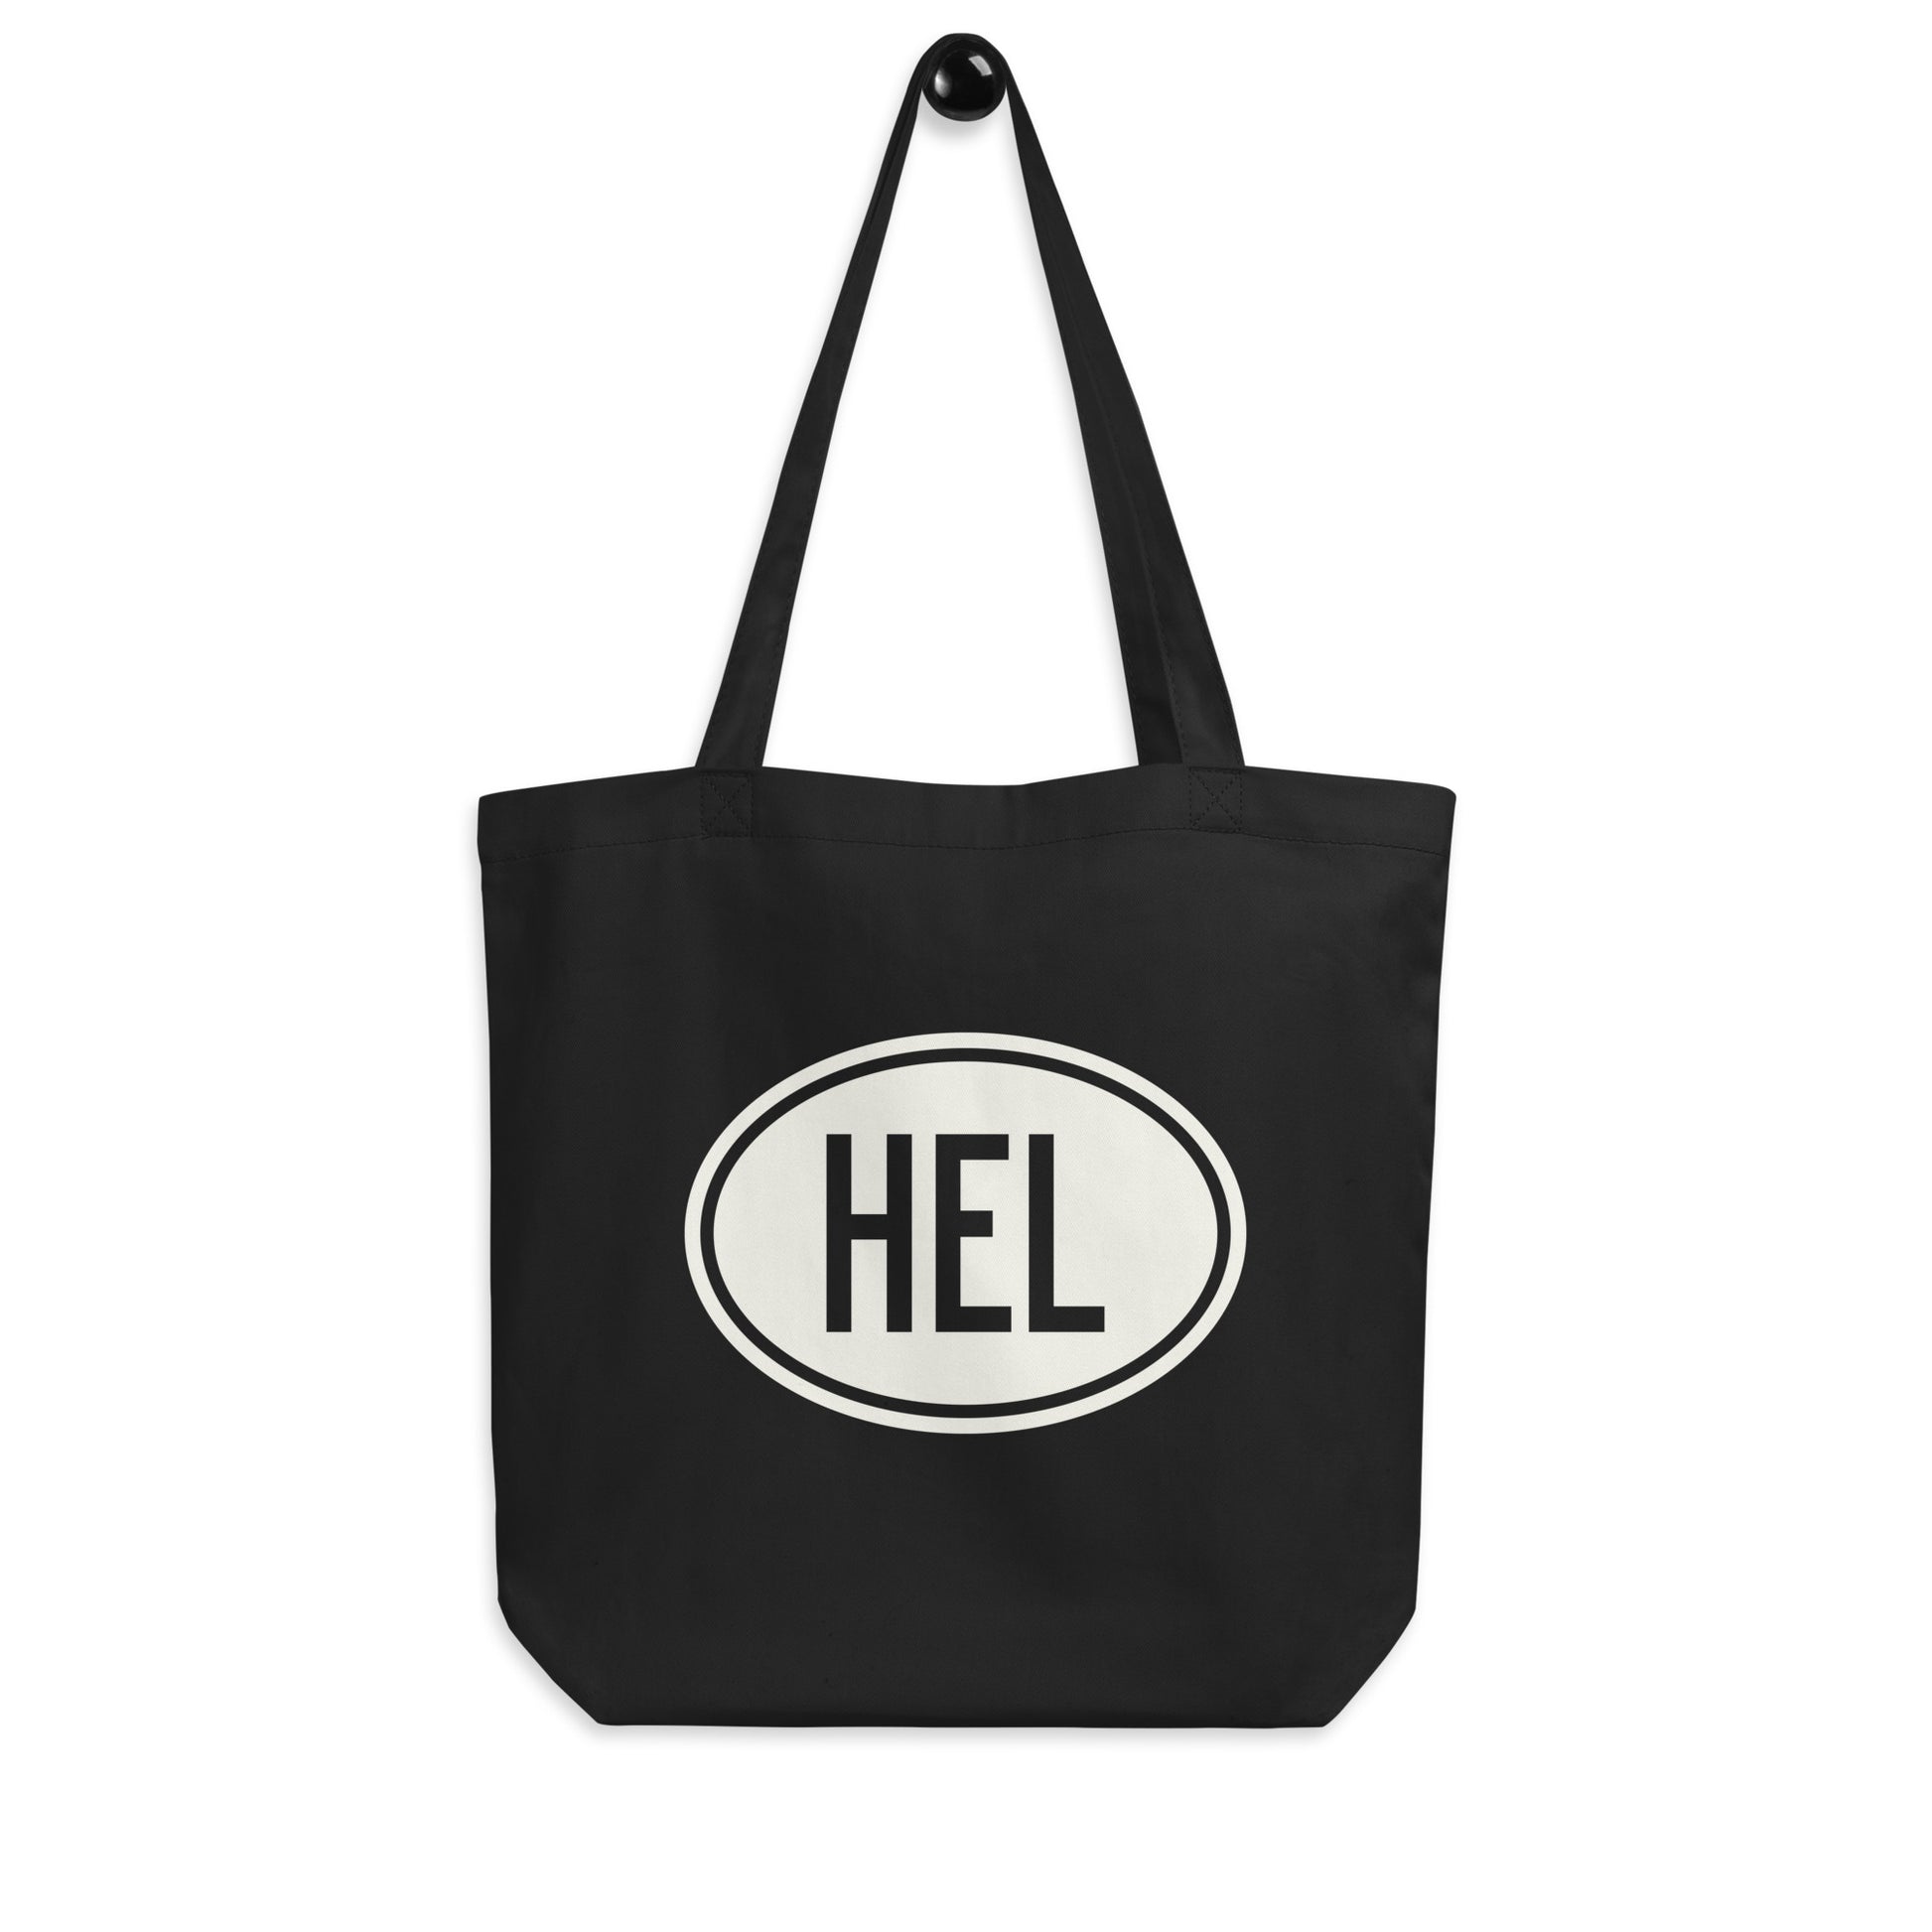 Unique Travel Gift Organic Tote - White Oval • HEL Helsinki • YHM Designs - Image 04